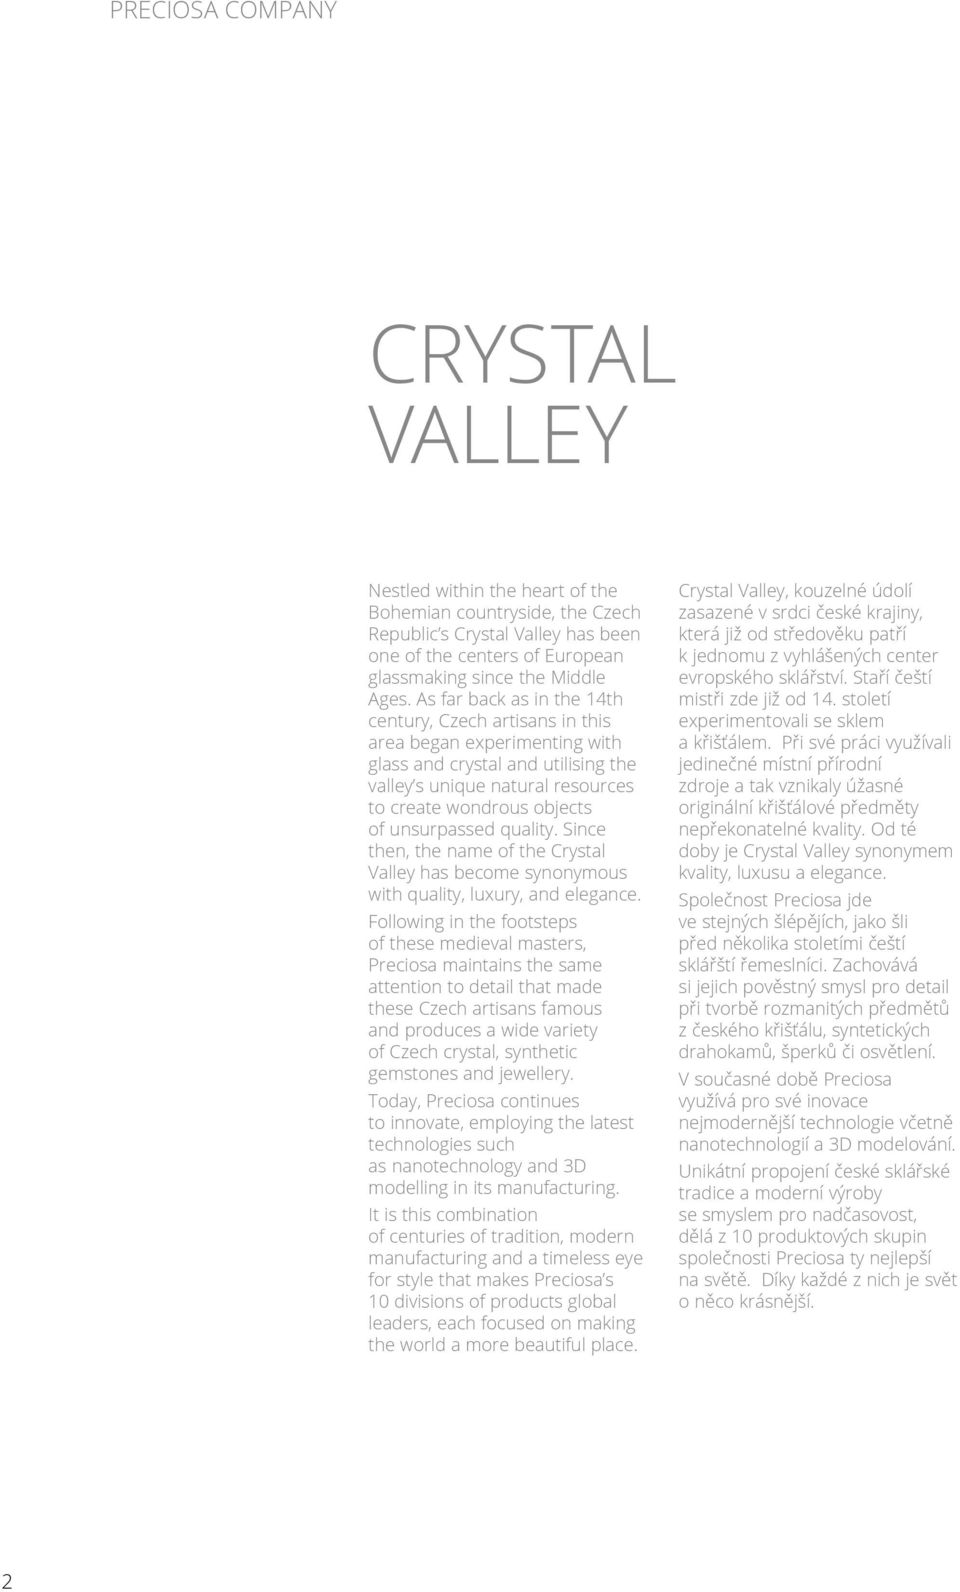 unsurpassed quality. Since then, the name of the Crystal Valley has become synonymous with quality, luxury, and elegance.